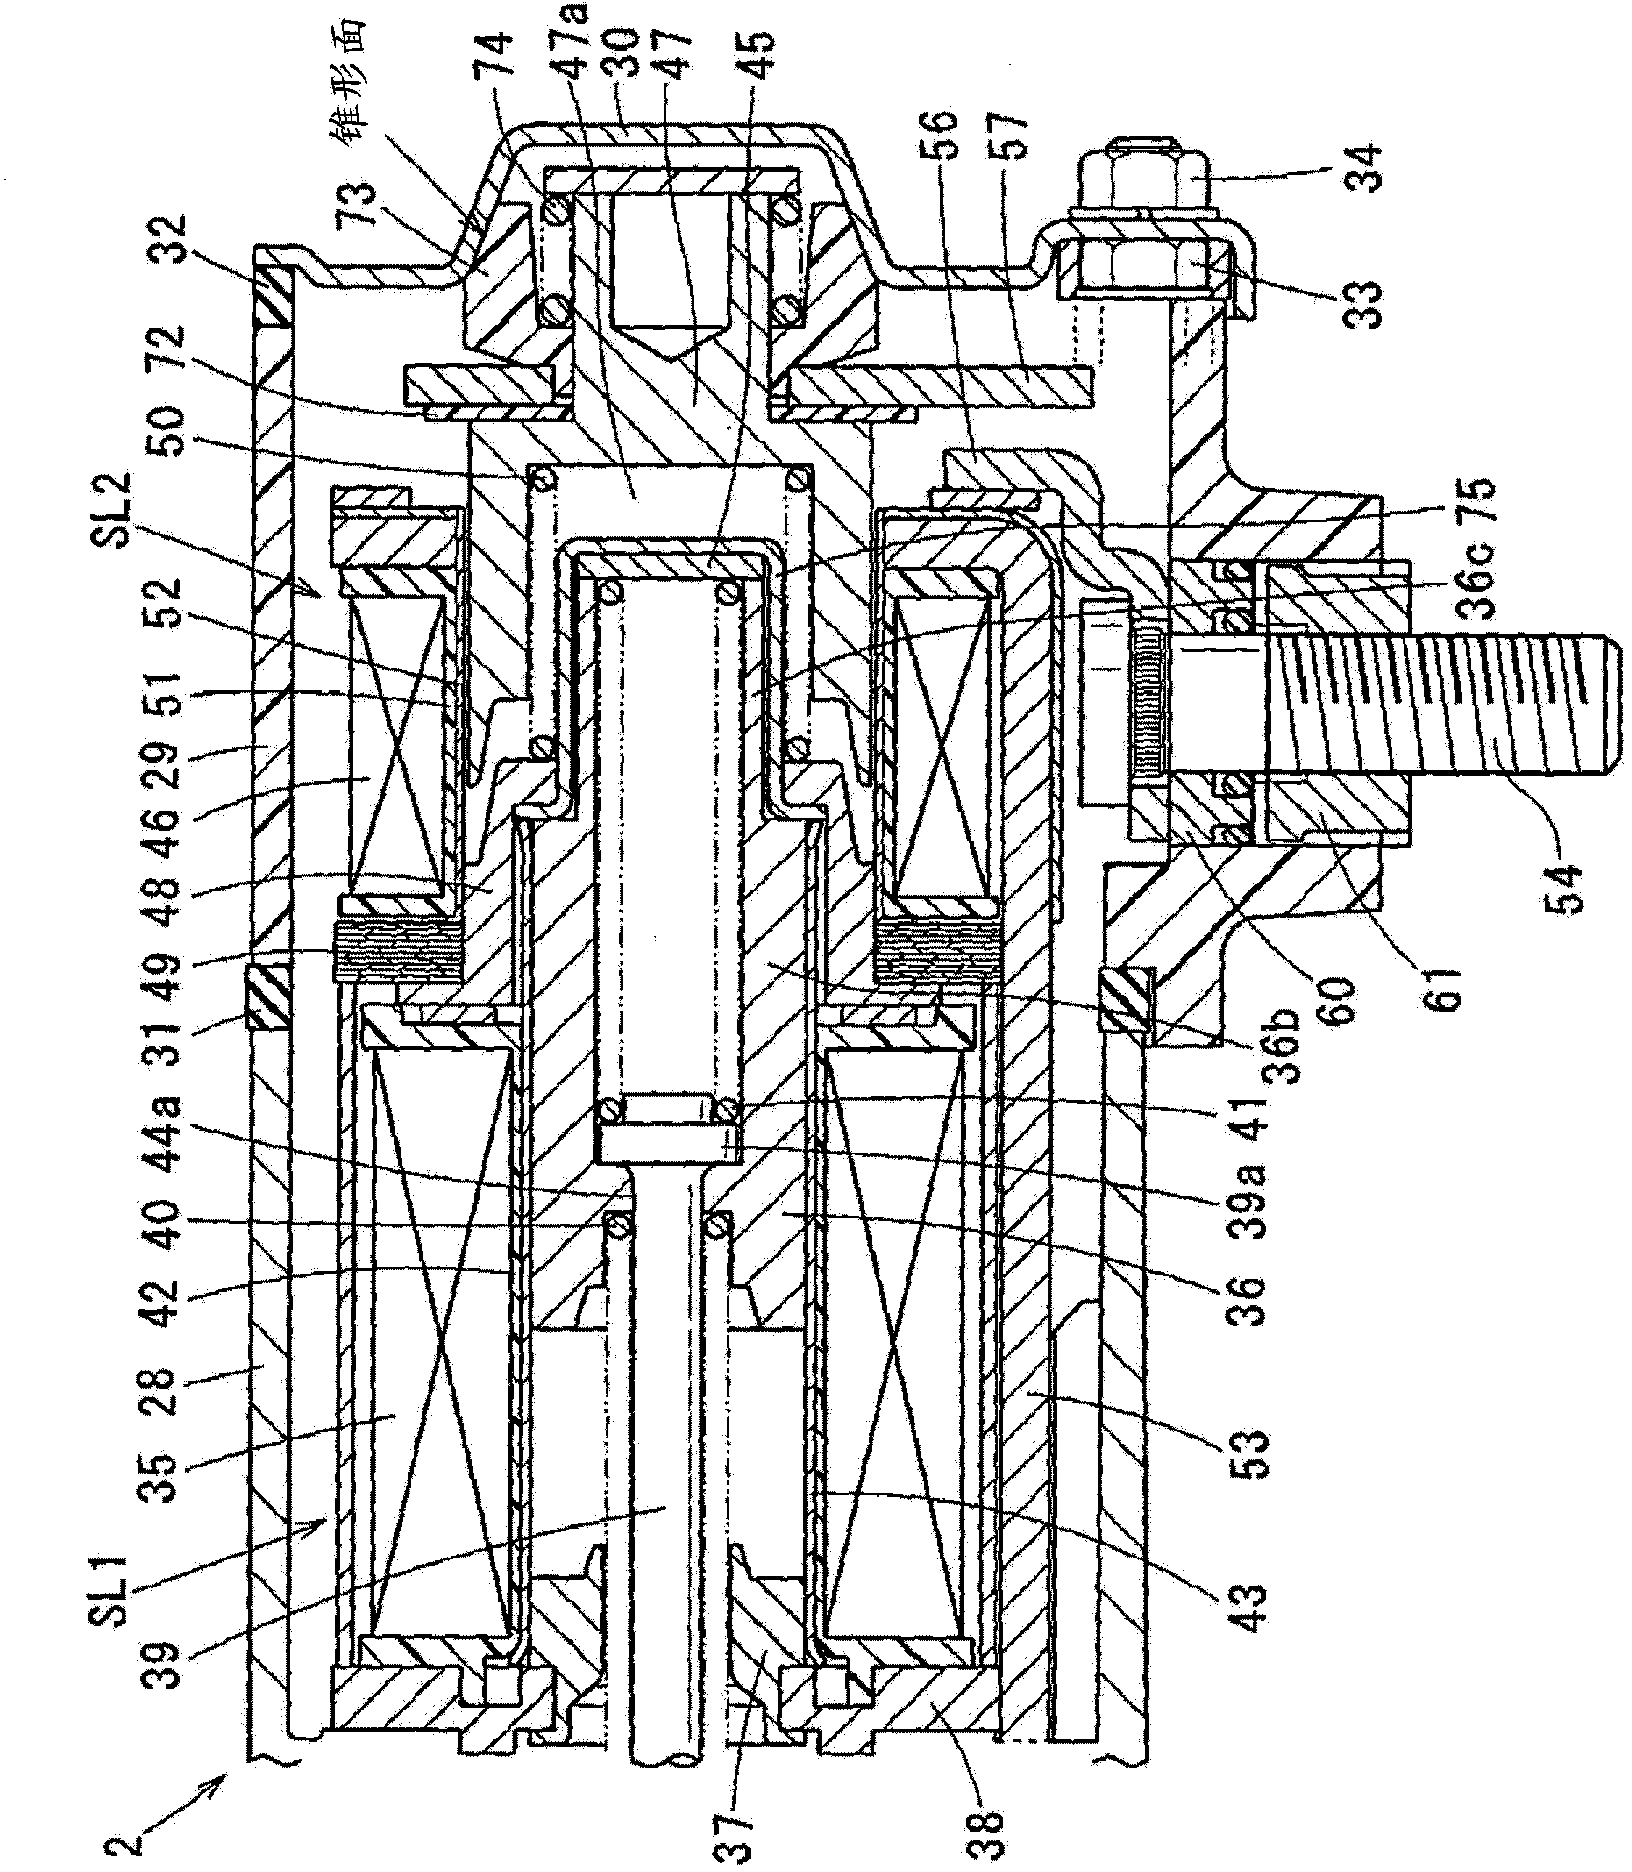 Electromagnetic solenoid device for a starter